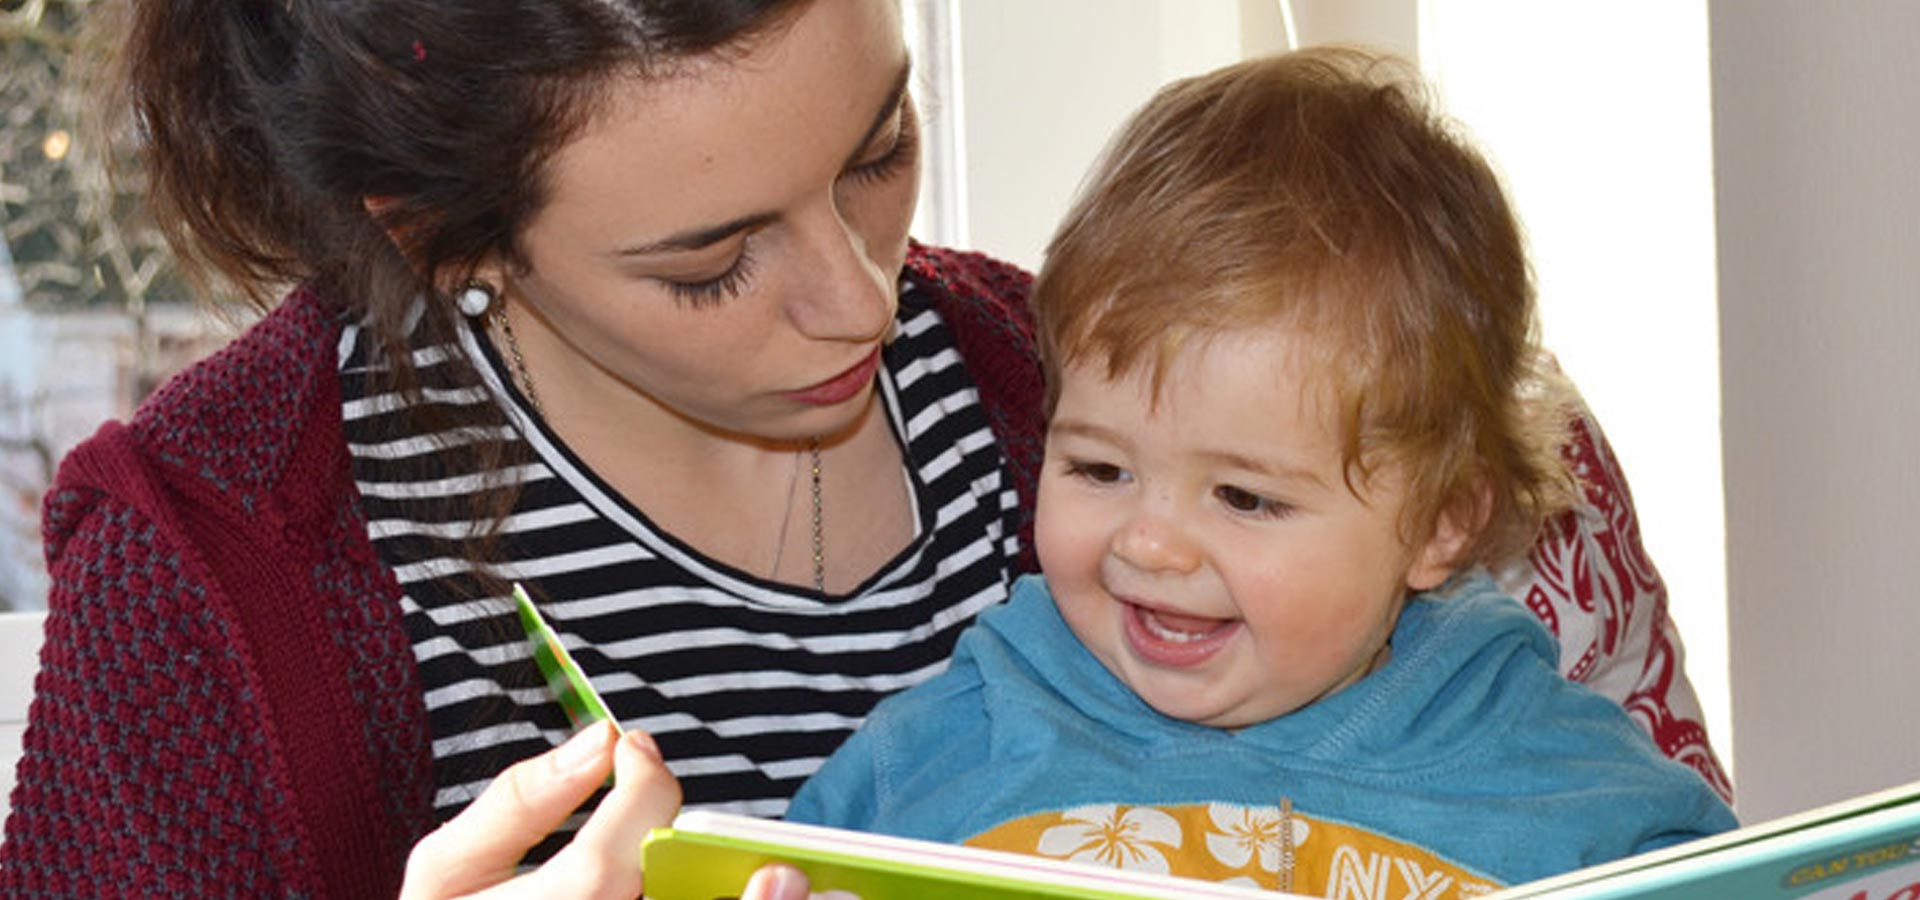 UK/NZ Nanny agency placing Nannies in London and the UK